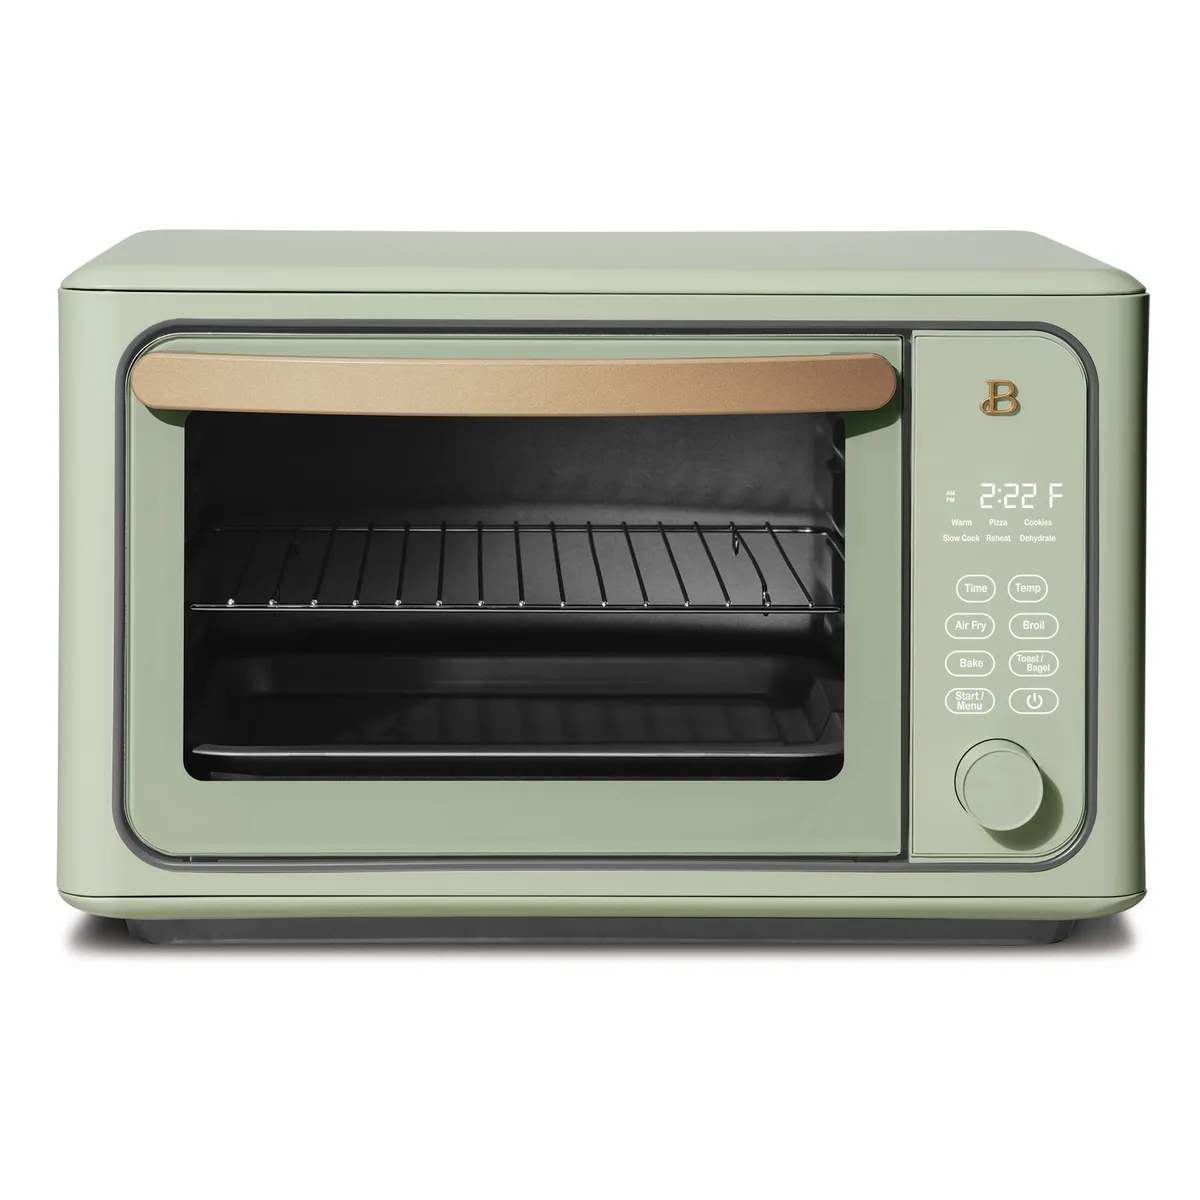 6 Slice Touchscreen Air Fryer Toaster Oven, Sage Green by Drew